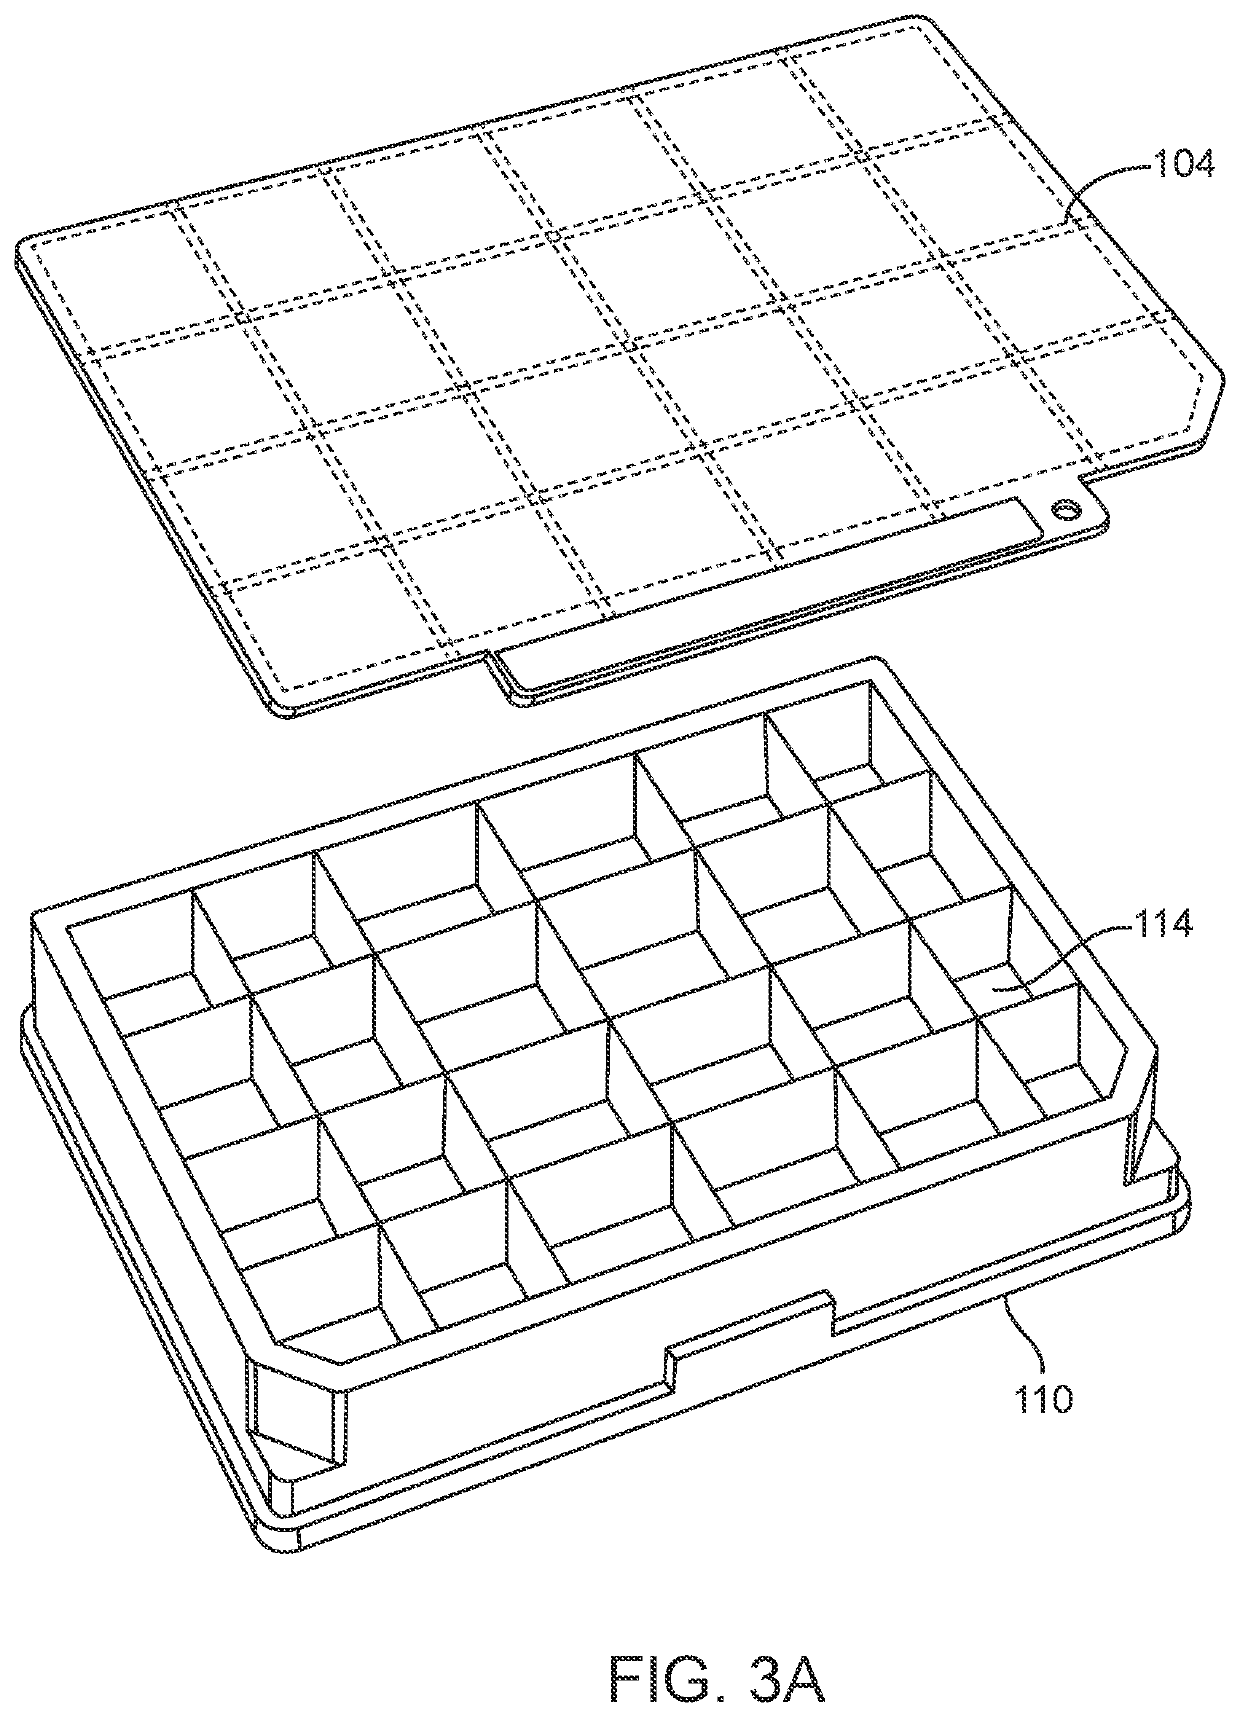 Microplate covers for environmental control and automation